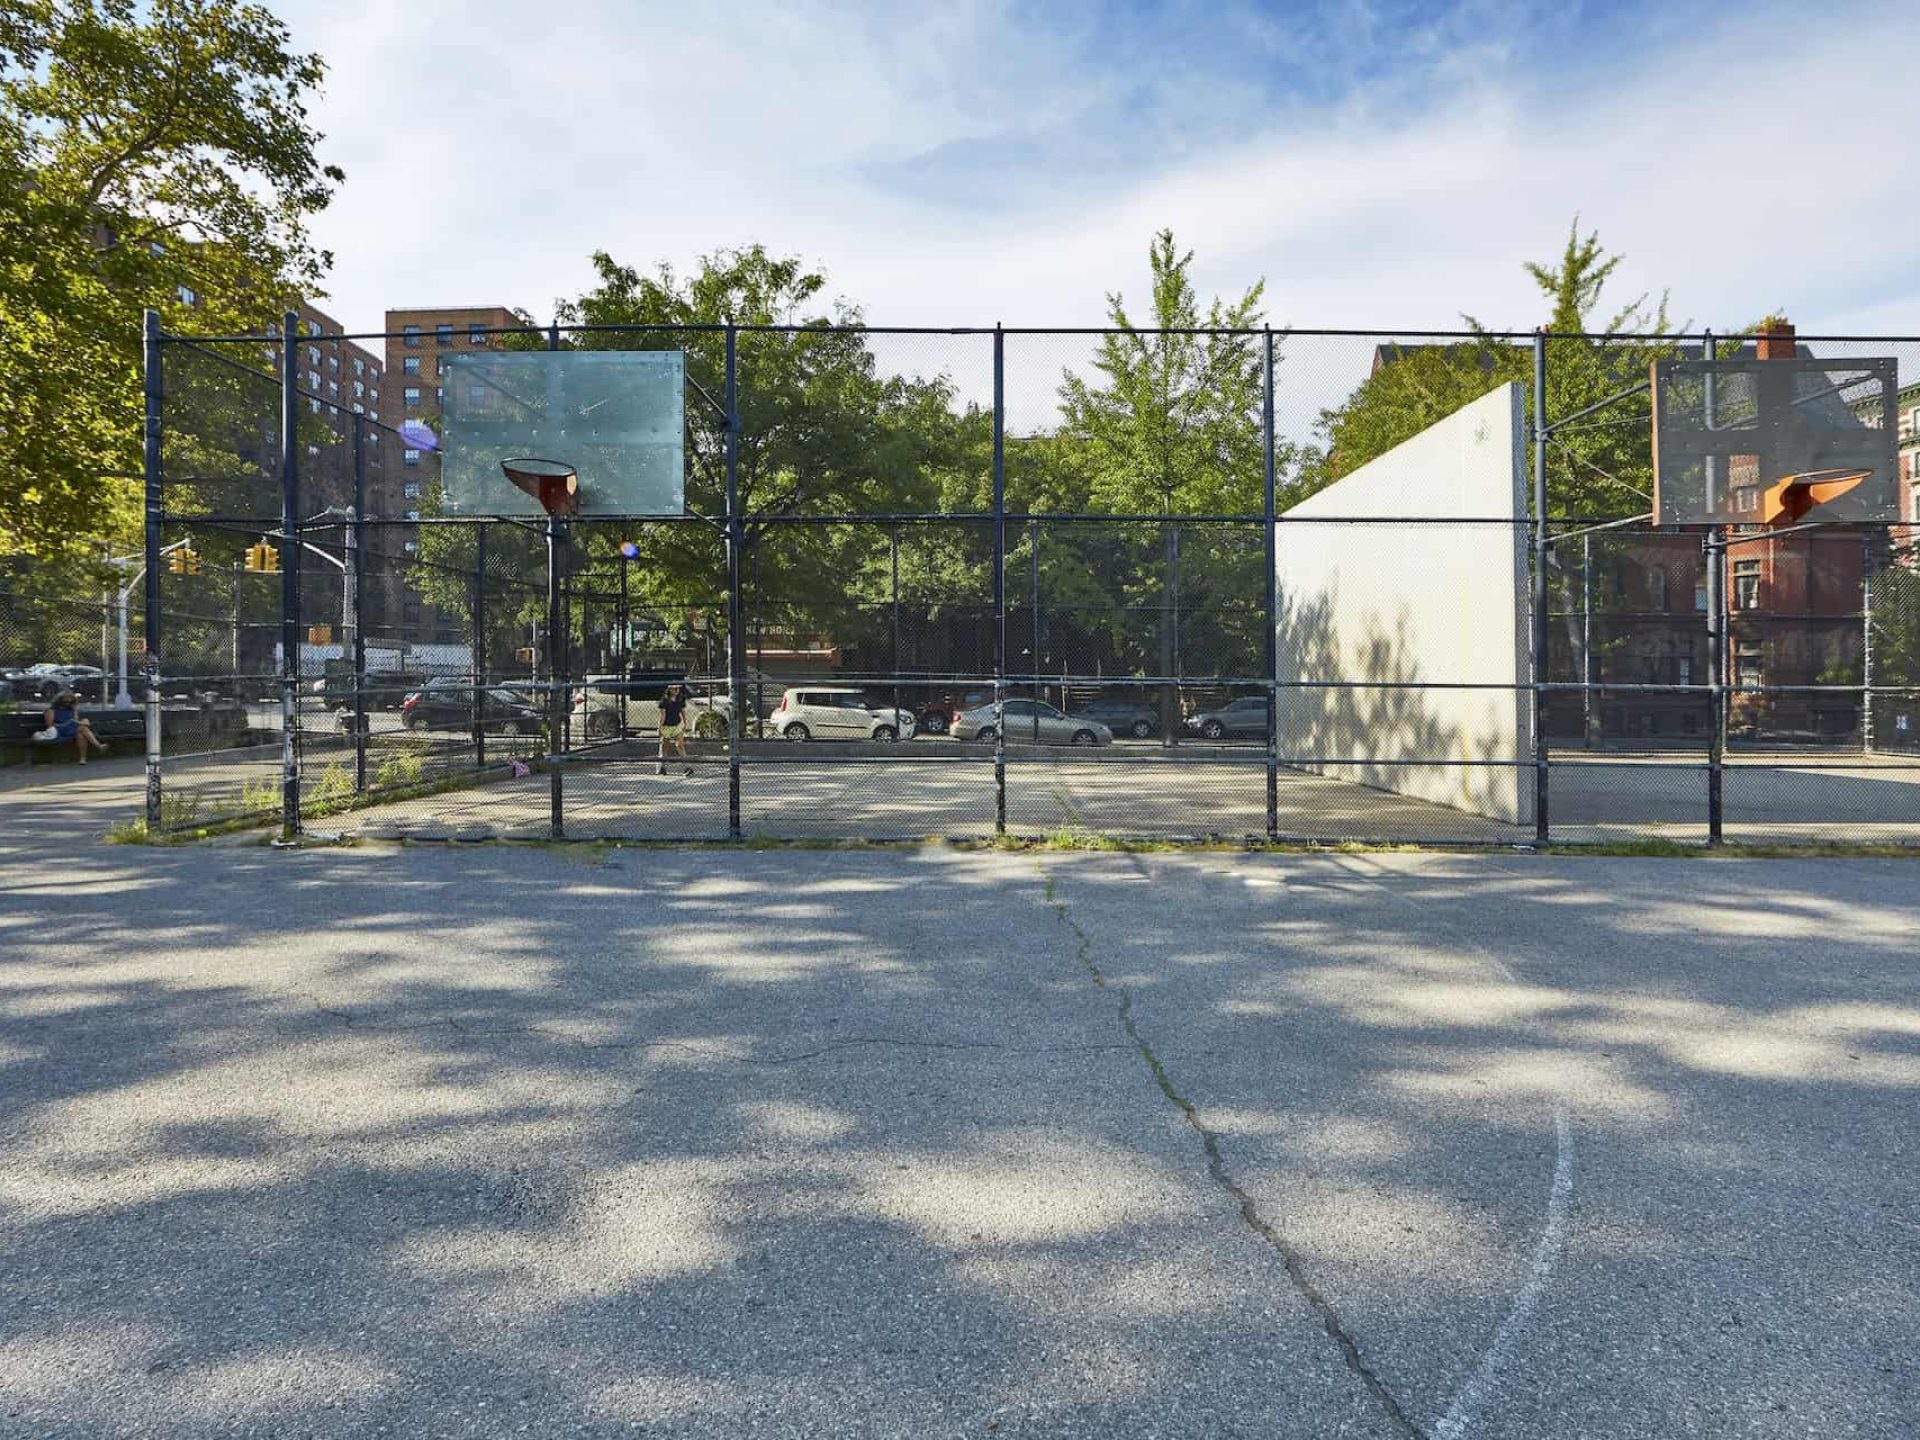 Outdoor basketball court in the Clinton Hill neighborhood. Large paved lot with two basketball hoops and tennis courts.